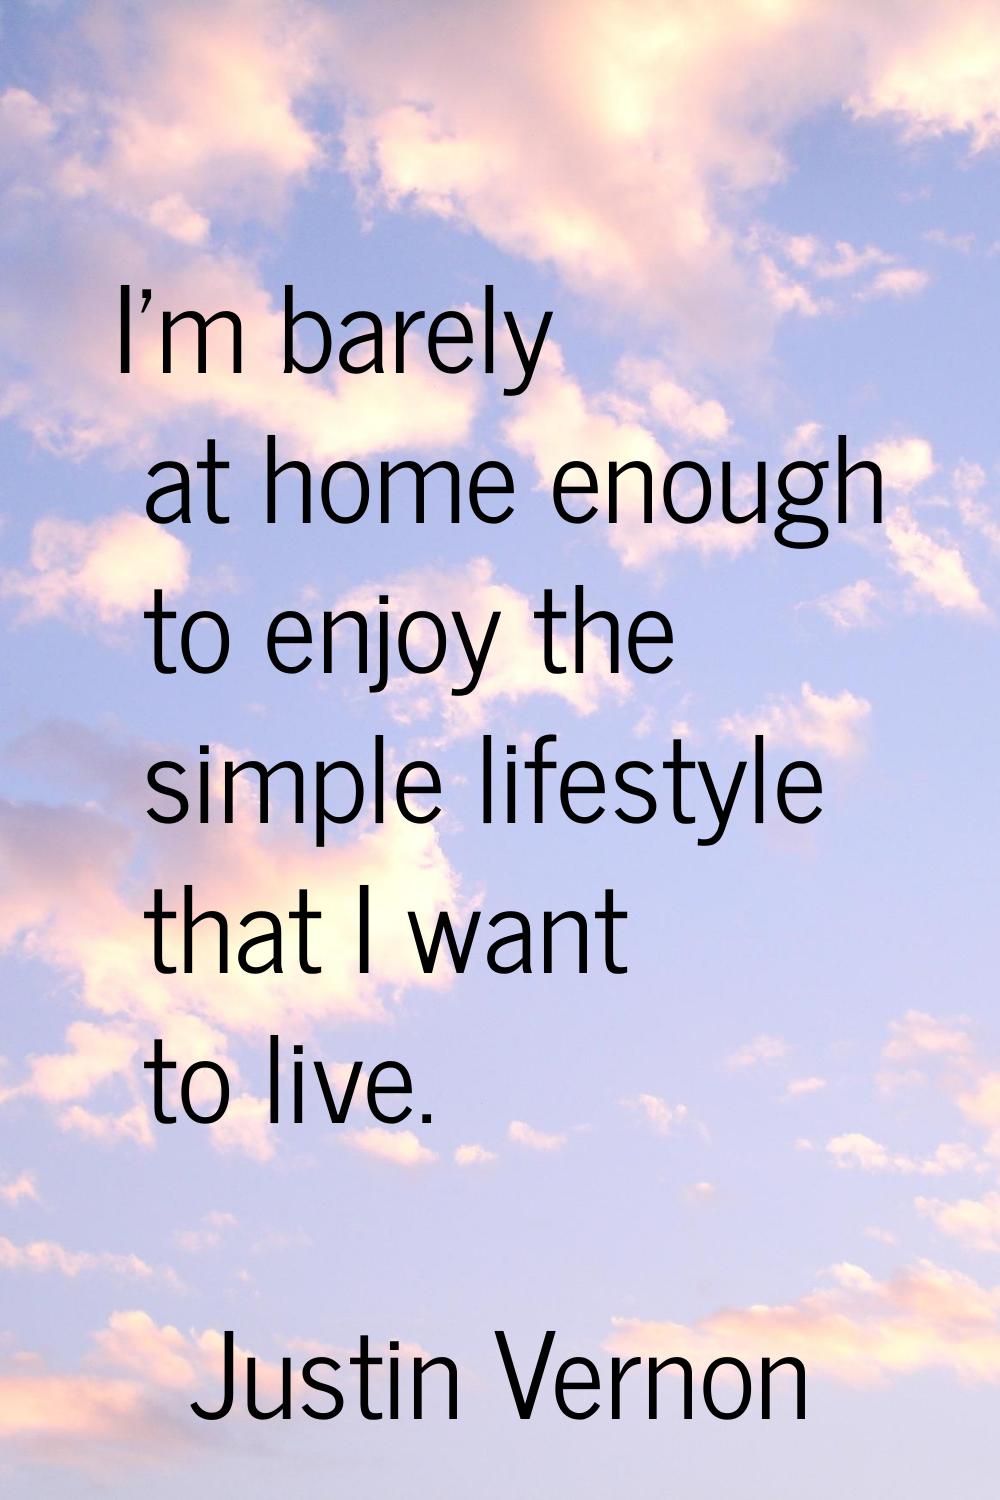 I'm barely at home enough to enjoy the simple lifestyle that I want to live.